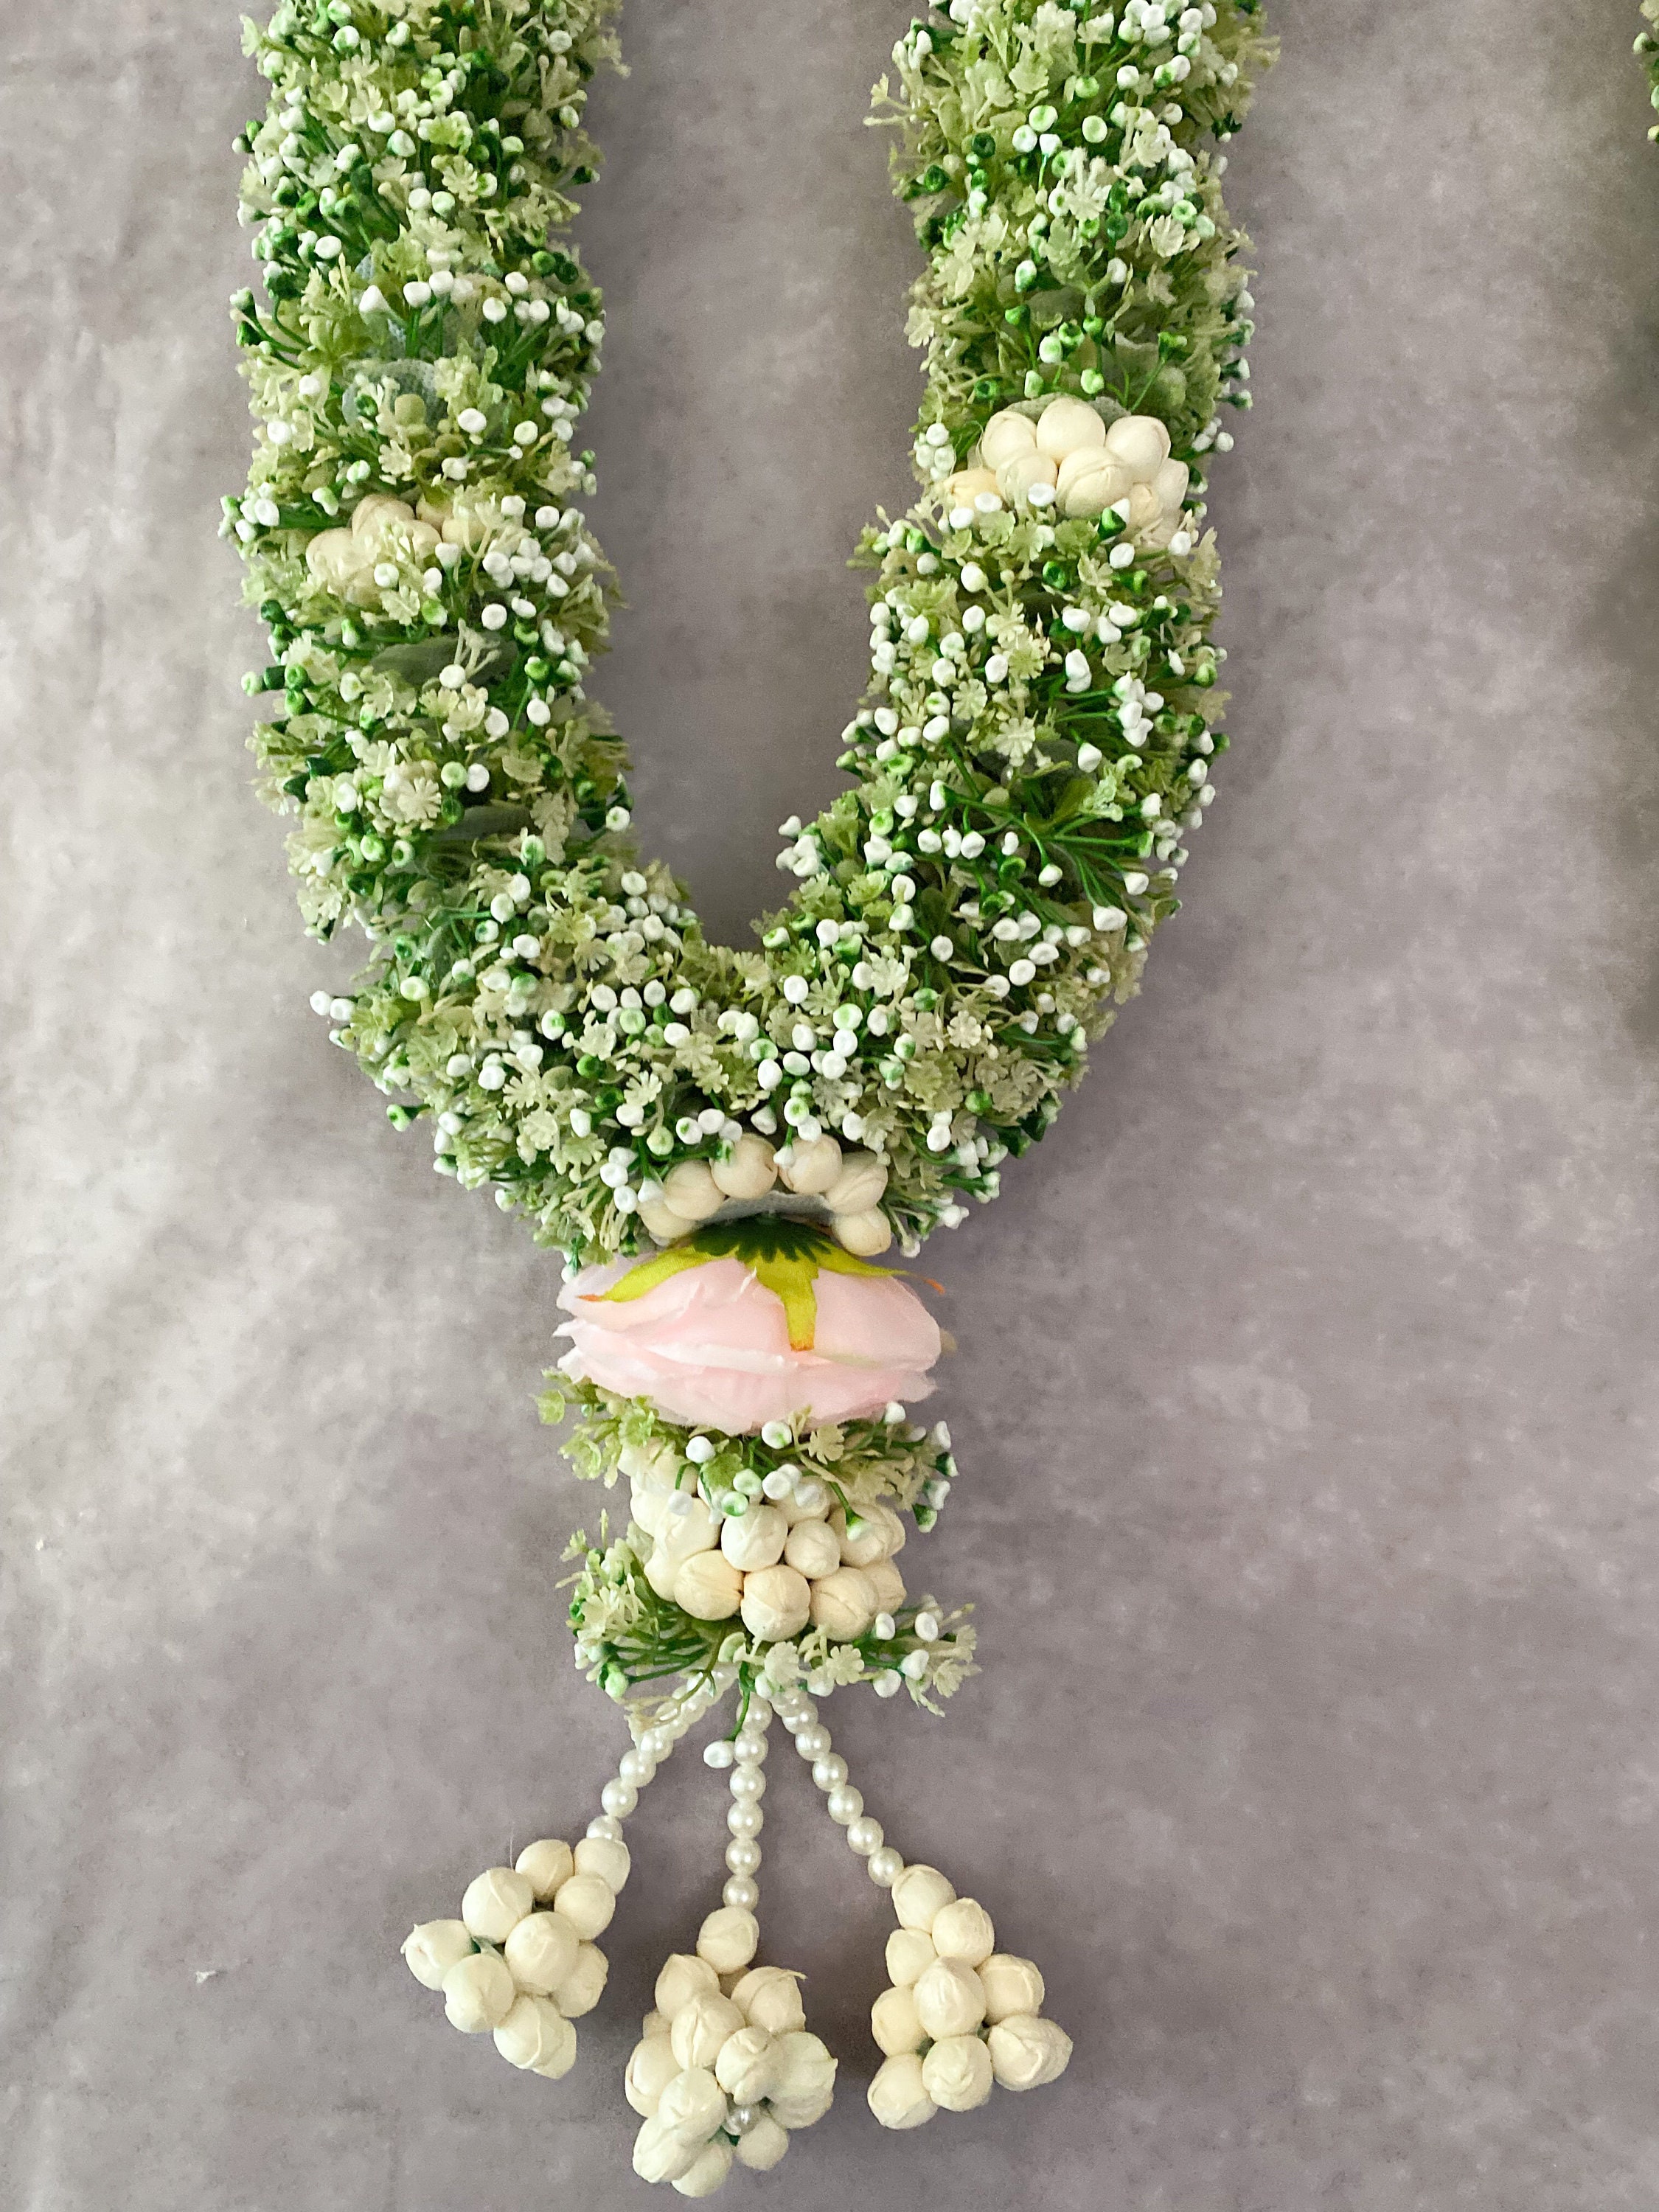 Mogra/Jasmine Baby Breath Flower Garland - Vasavi Crafts is a store all  kinds of wedding décor, Indian Wedding and Pakistani Wedding Decorations in  USA